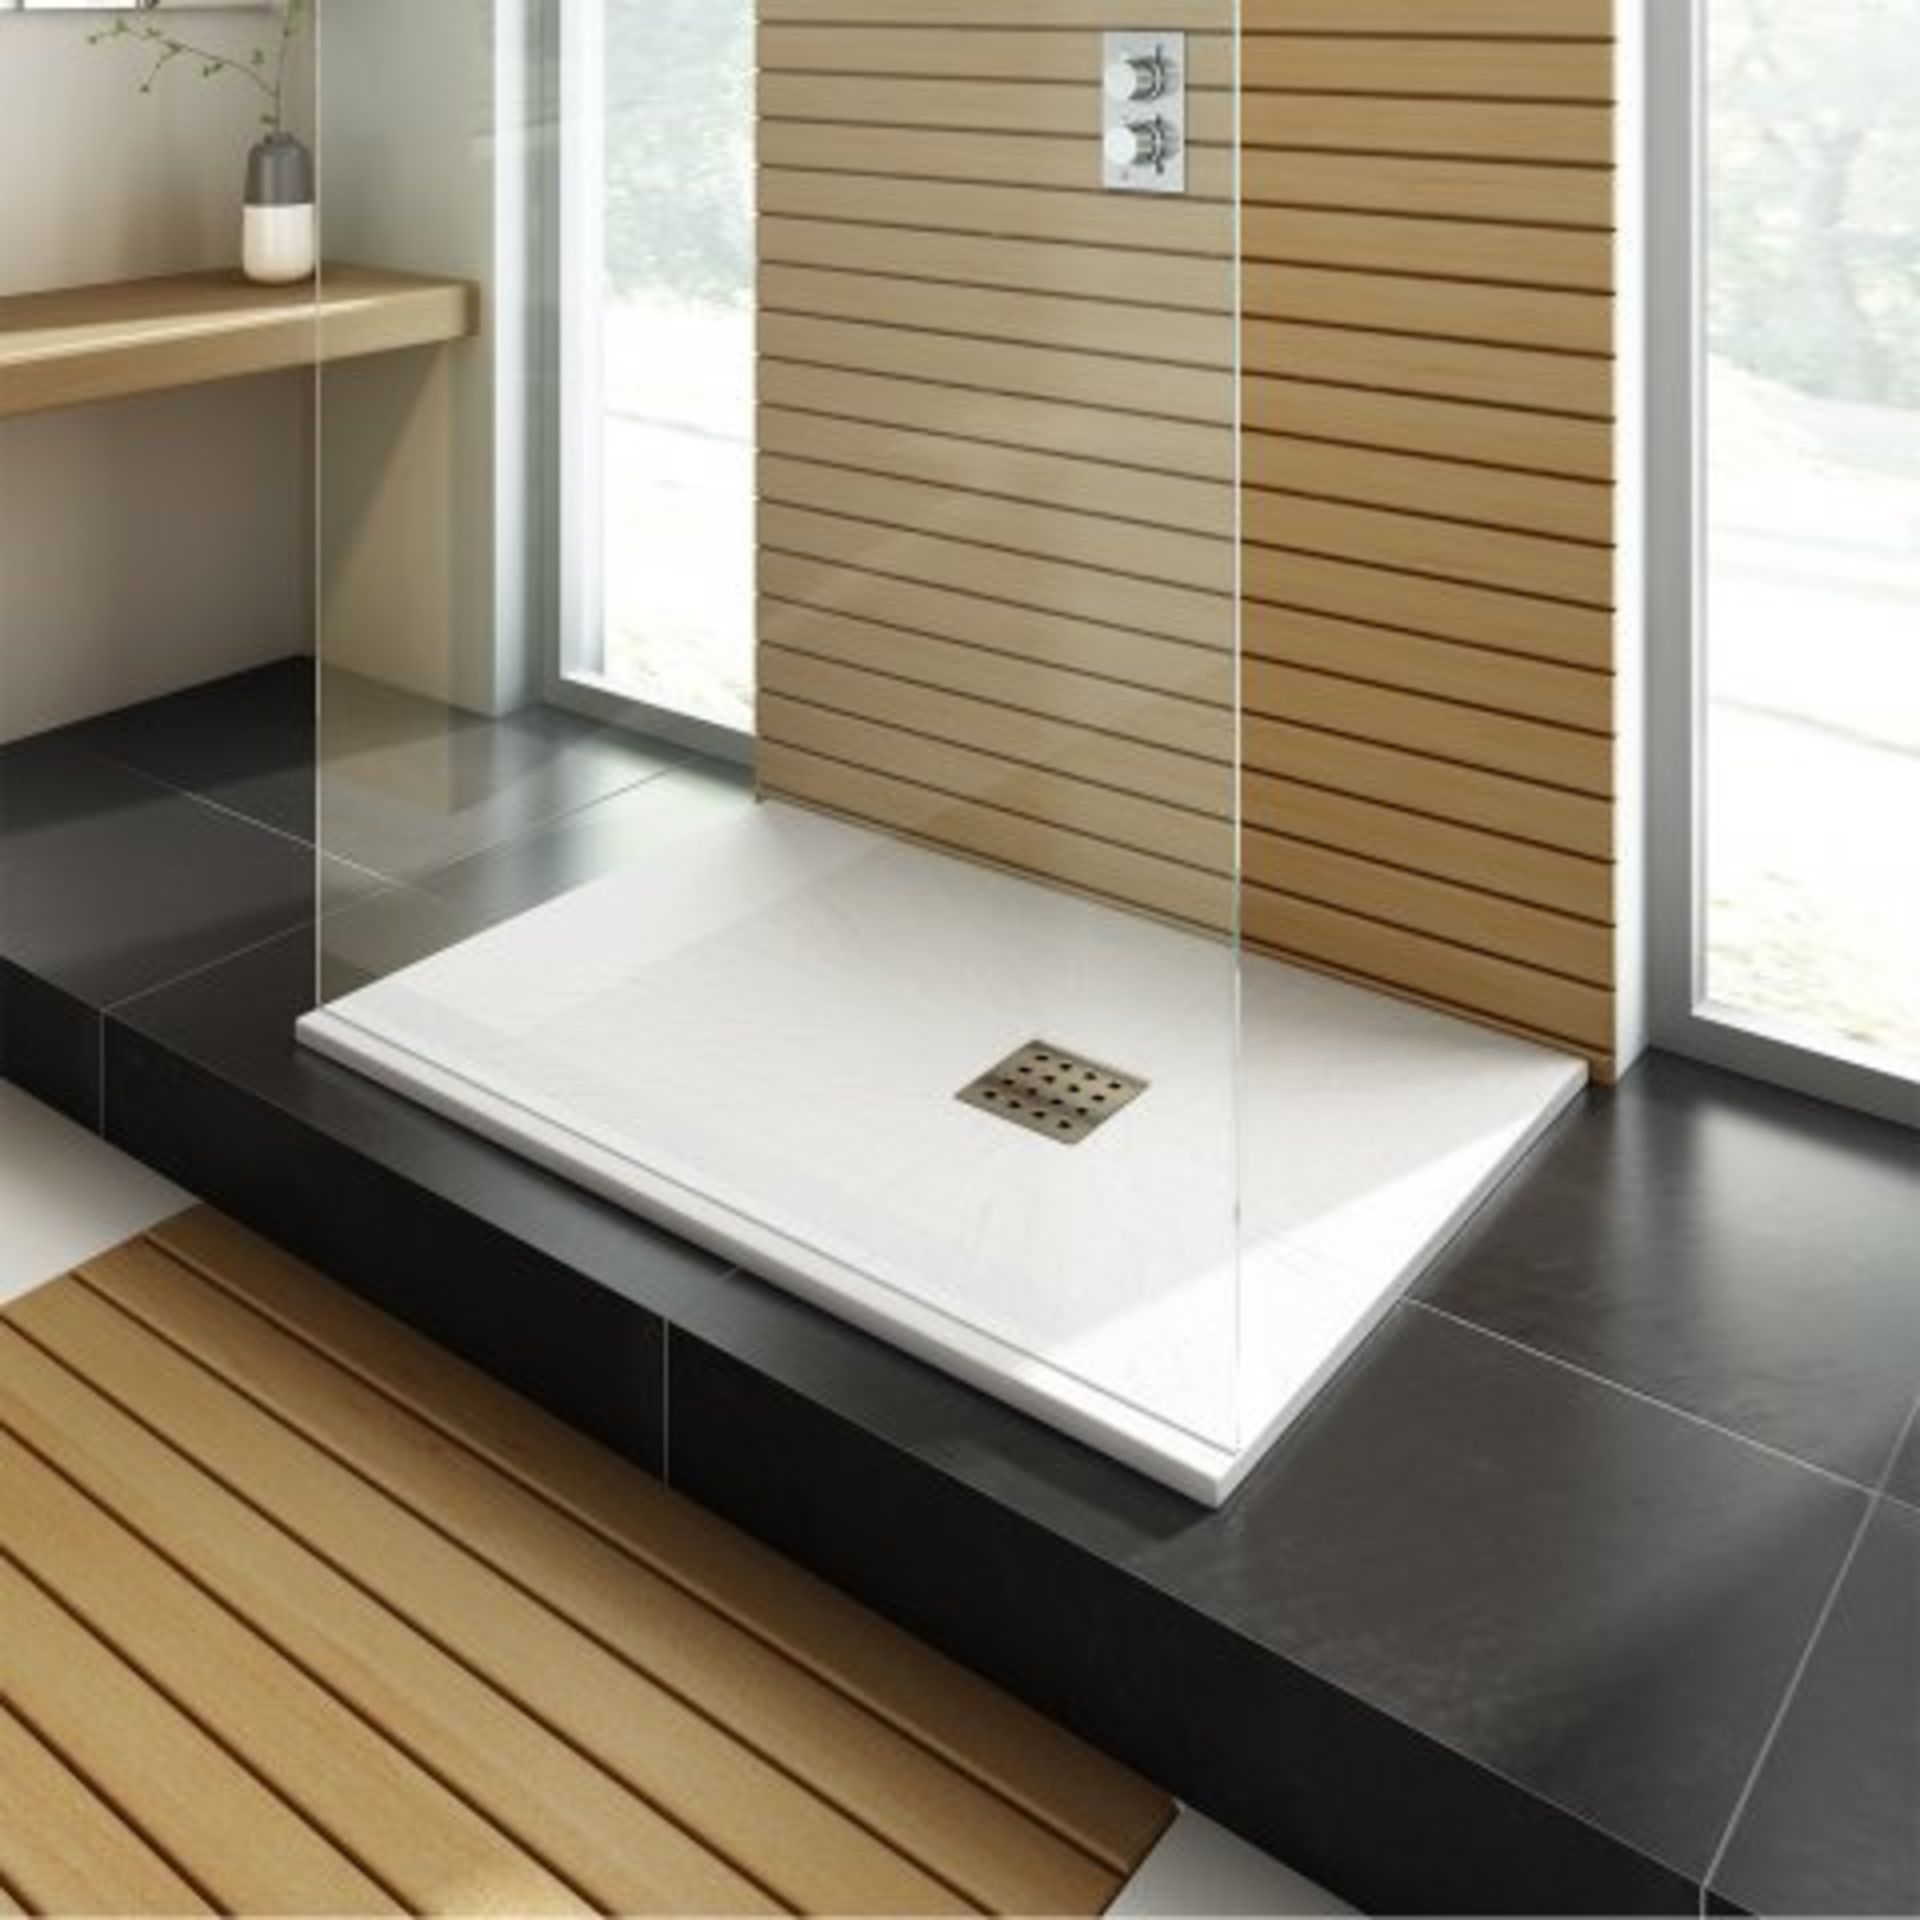 New 1200x900mm Rectangular White Slate Effect Shower Tray. RRP £549.99.Hand Crafted From High...